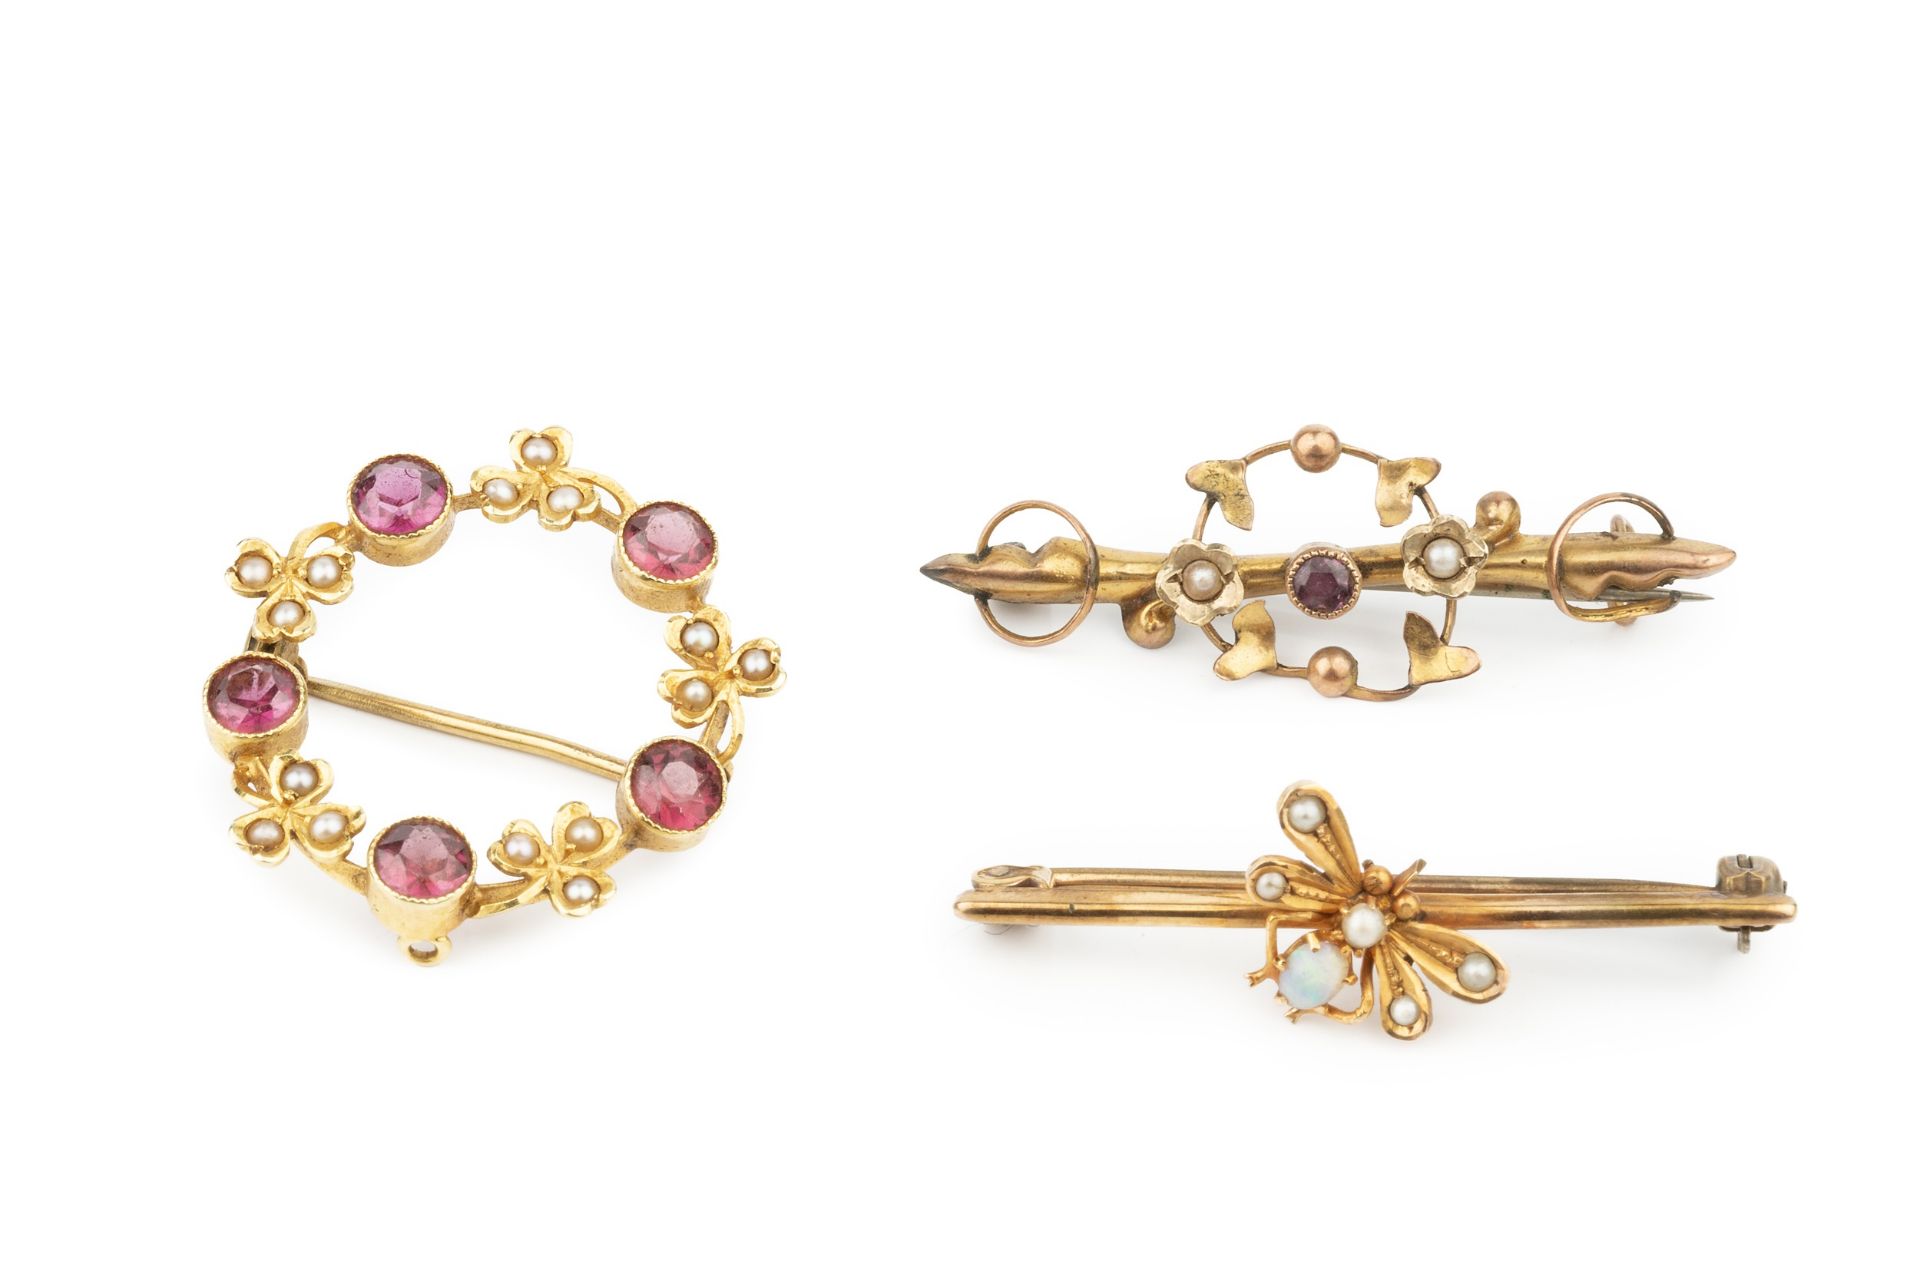 An Edwardian garnet and seed pearl set wreath brooch, the pink stones alternating with seed pearl